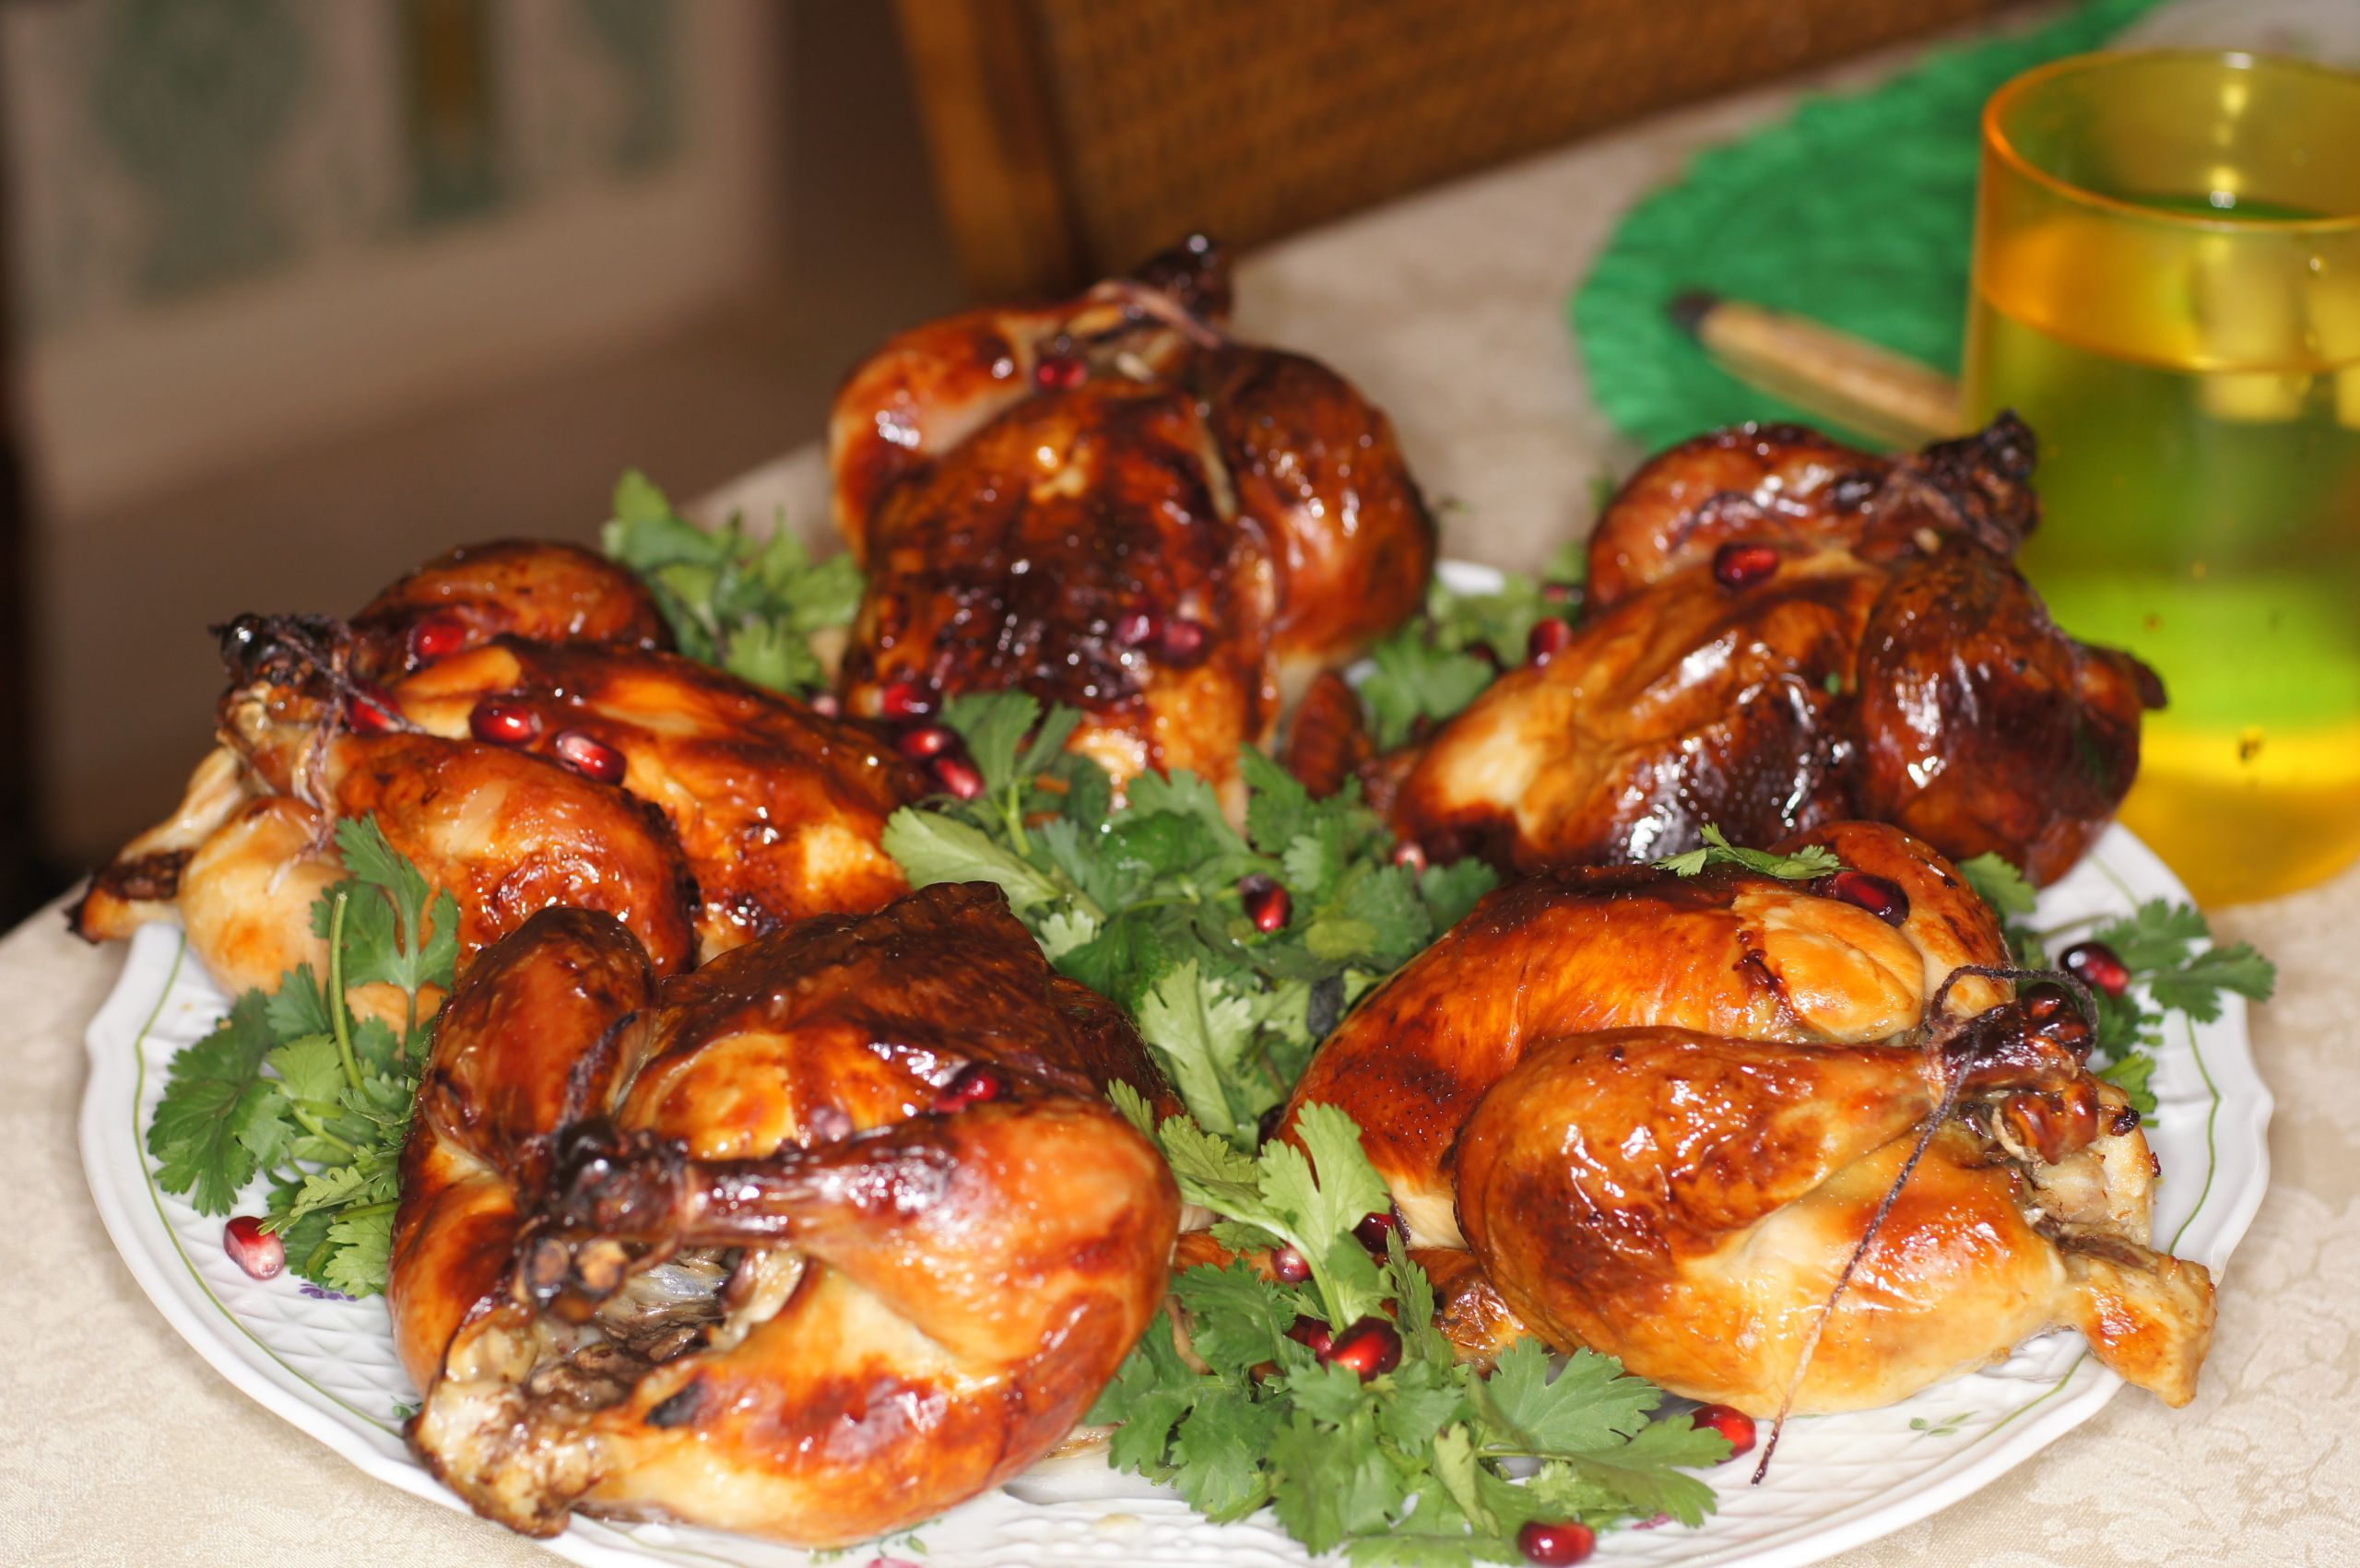 Recipes For Cornish Game Hens
 Roasted Brined Cornish Game Hens with Pomegranate Sauce